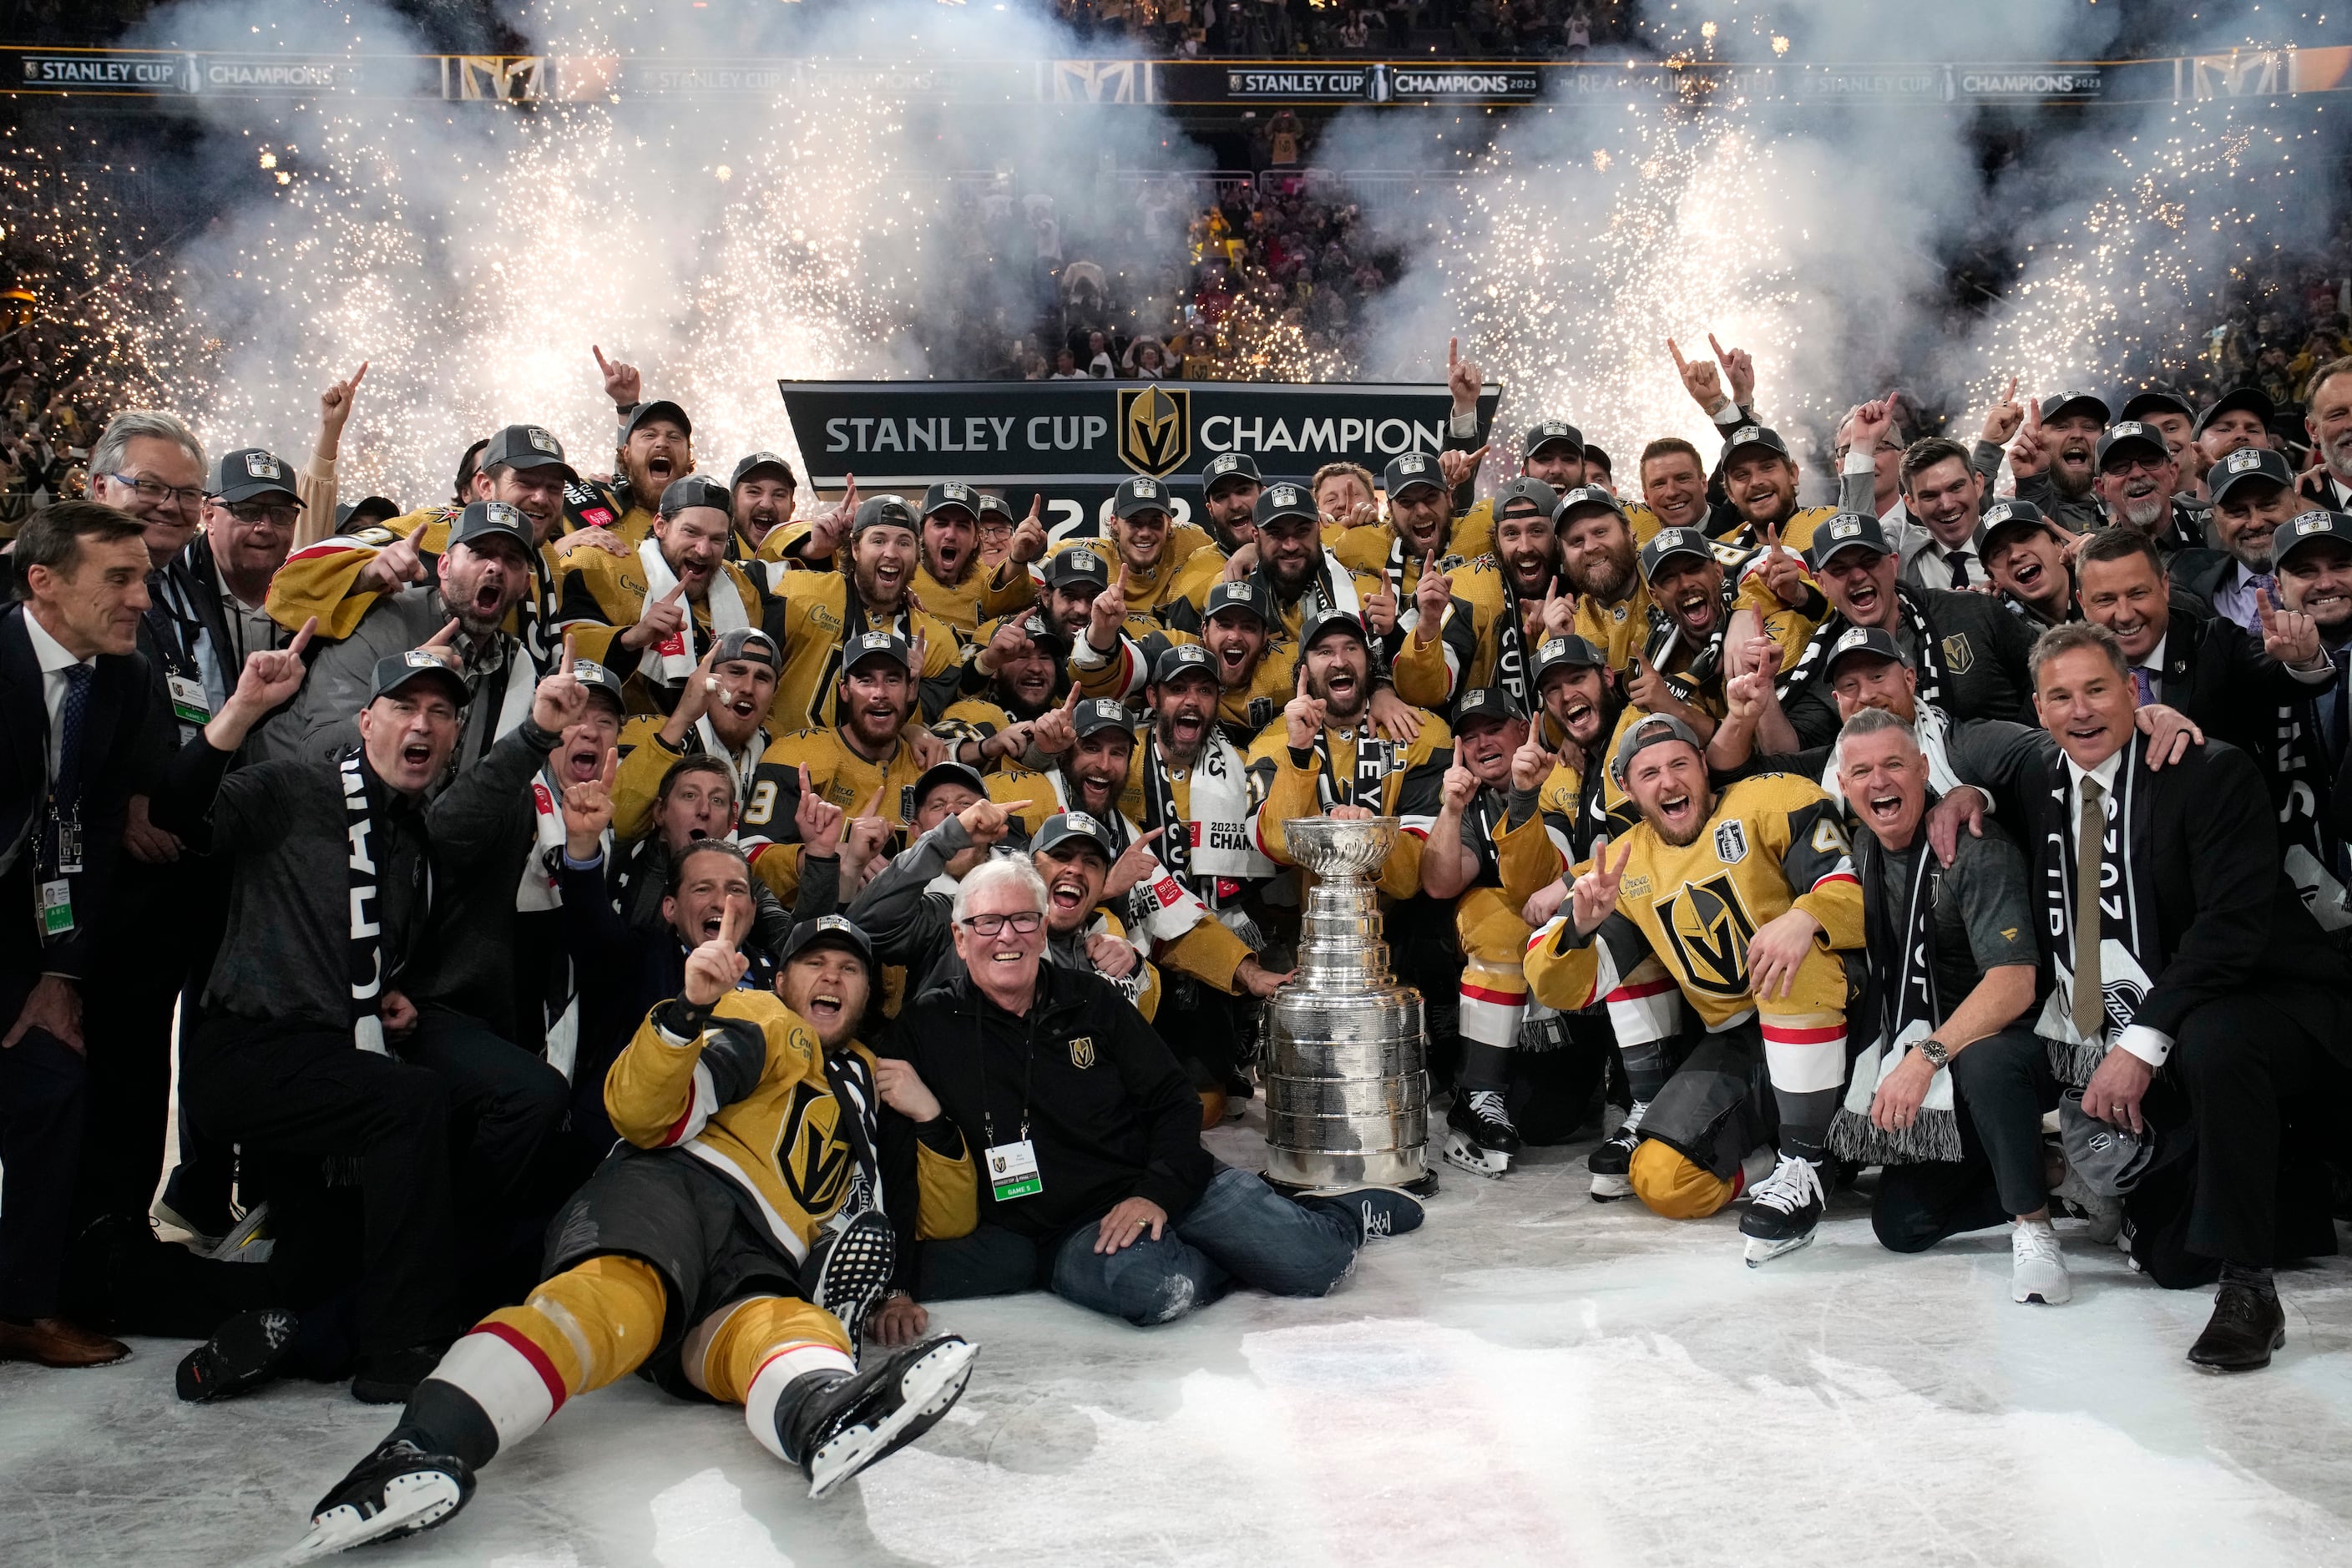 Penguins party like rock stars with Stanley Cup